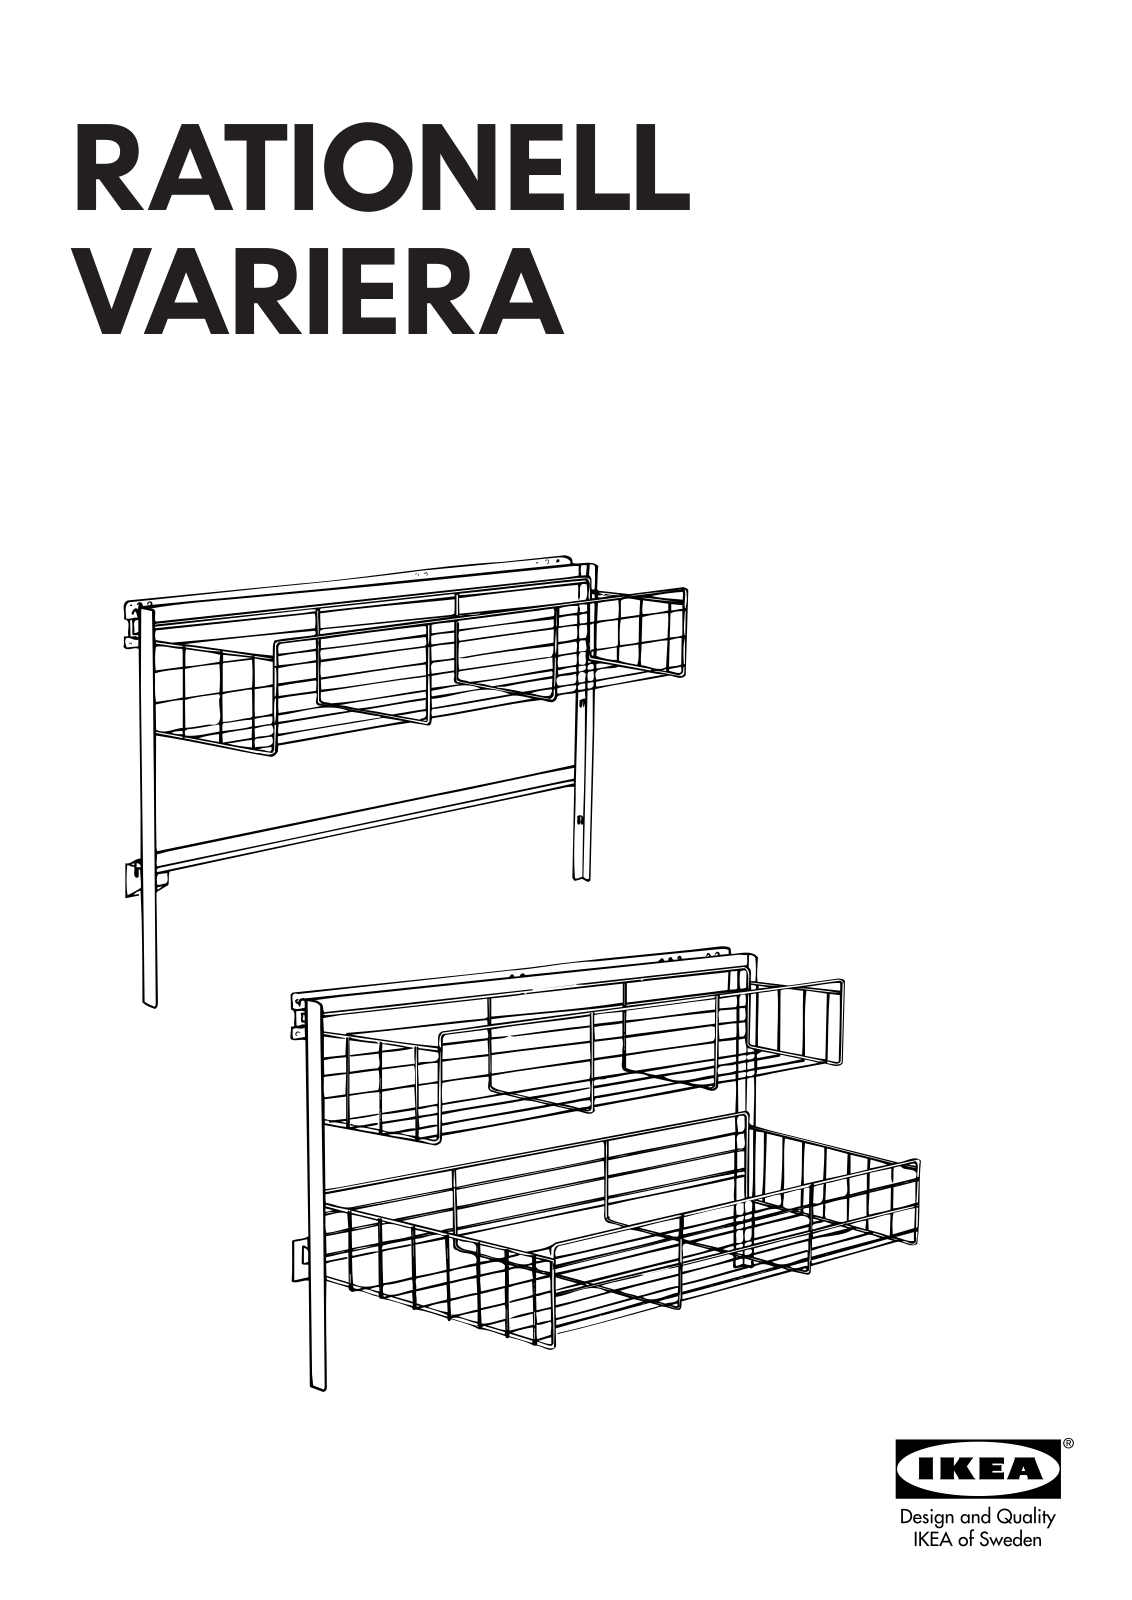 IKEA RATIONELL VARIERA PULL-OUT BASKET Assembly Instruction